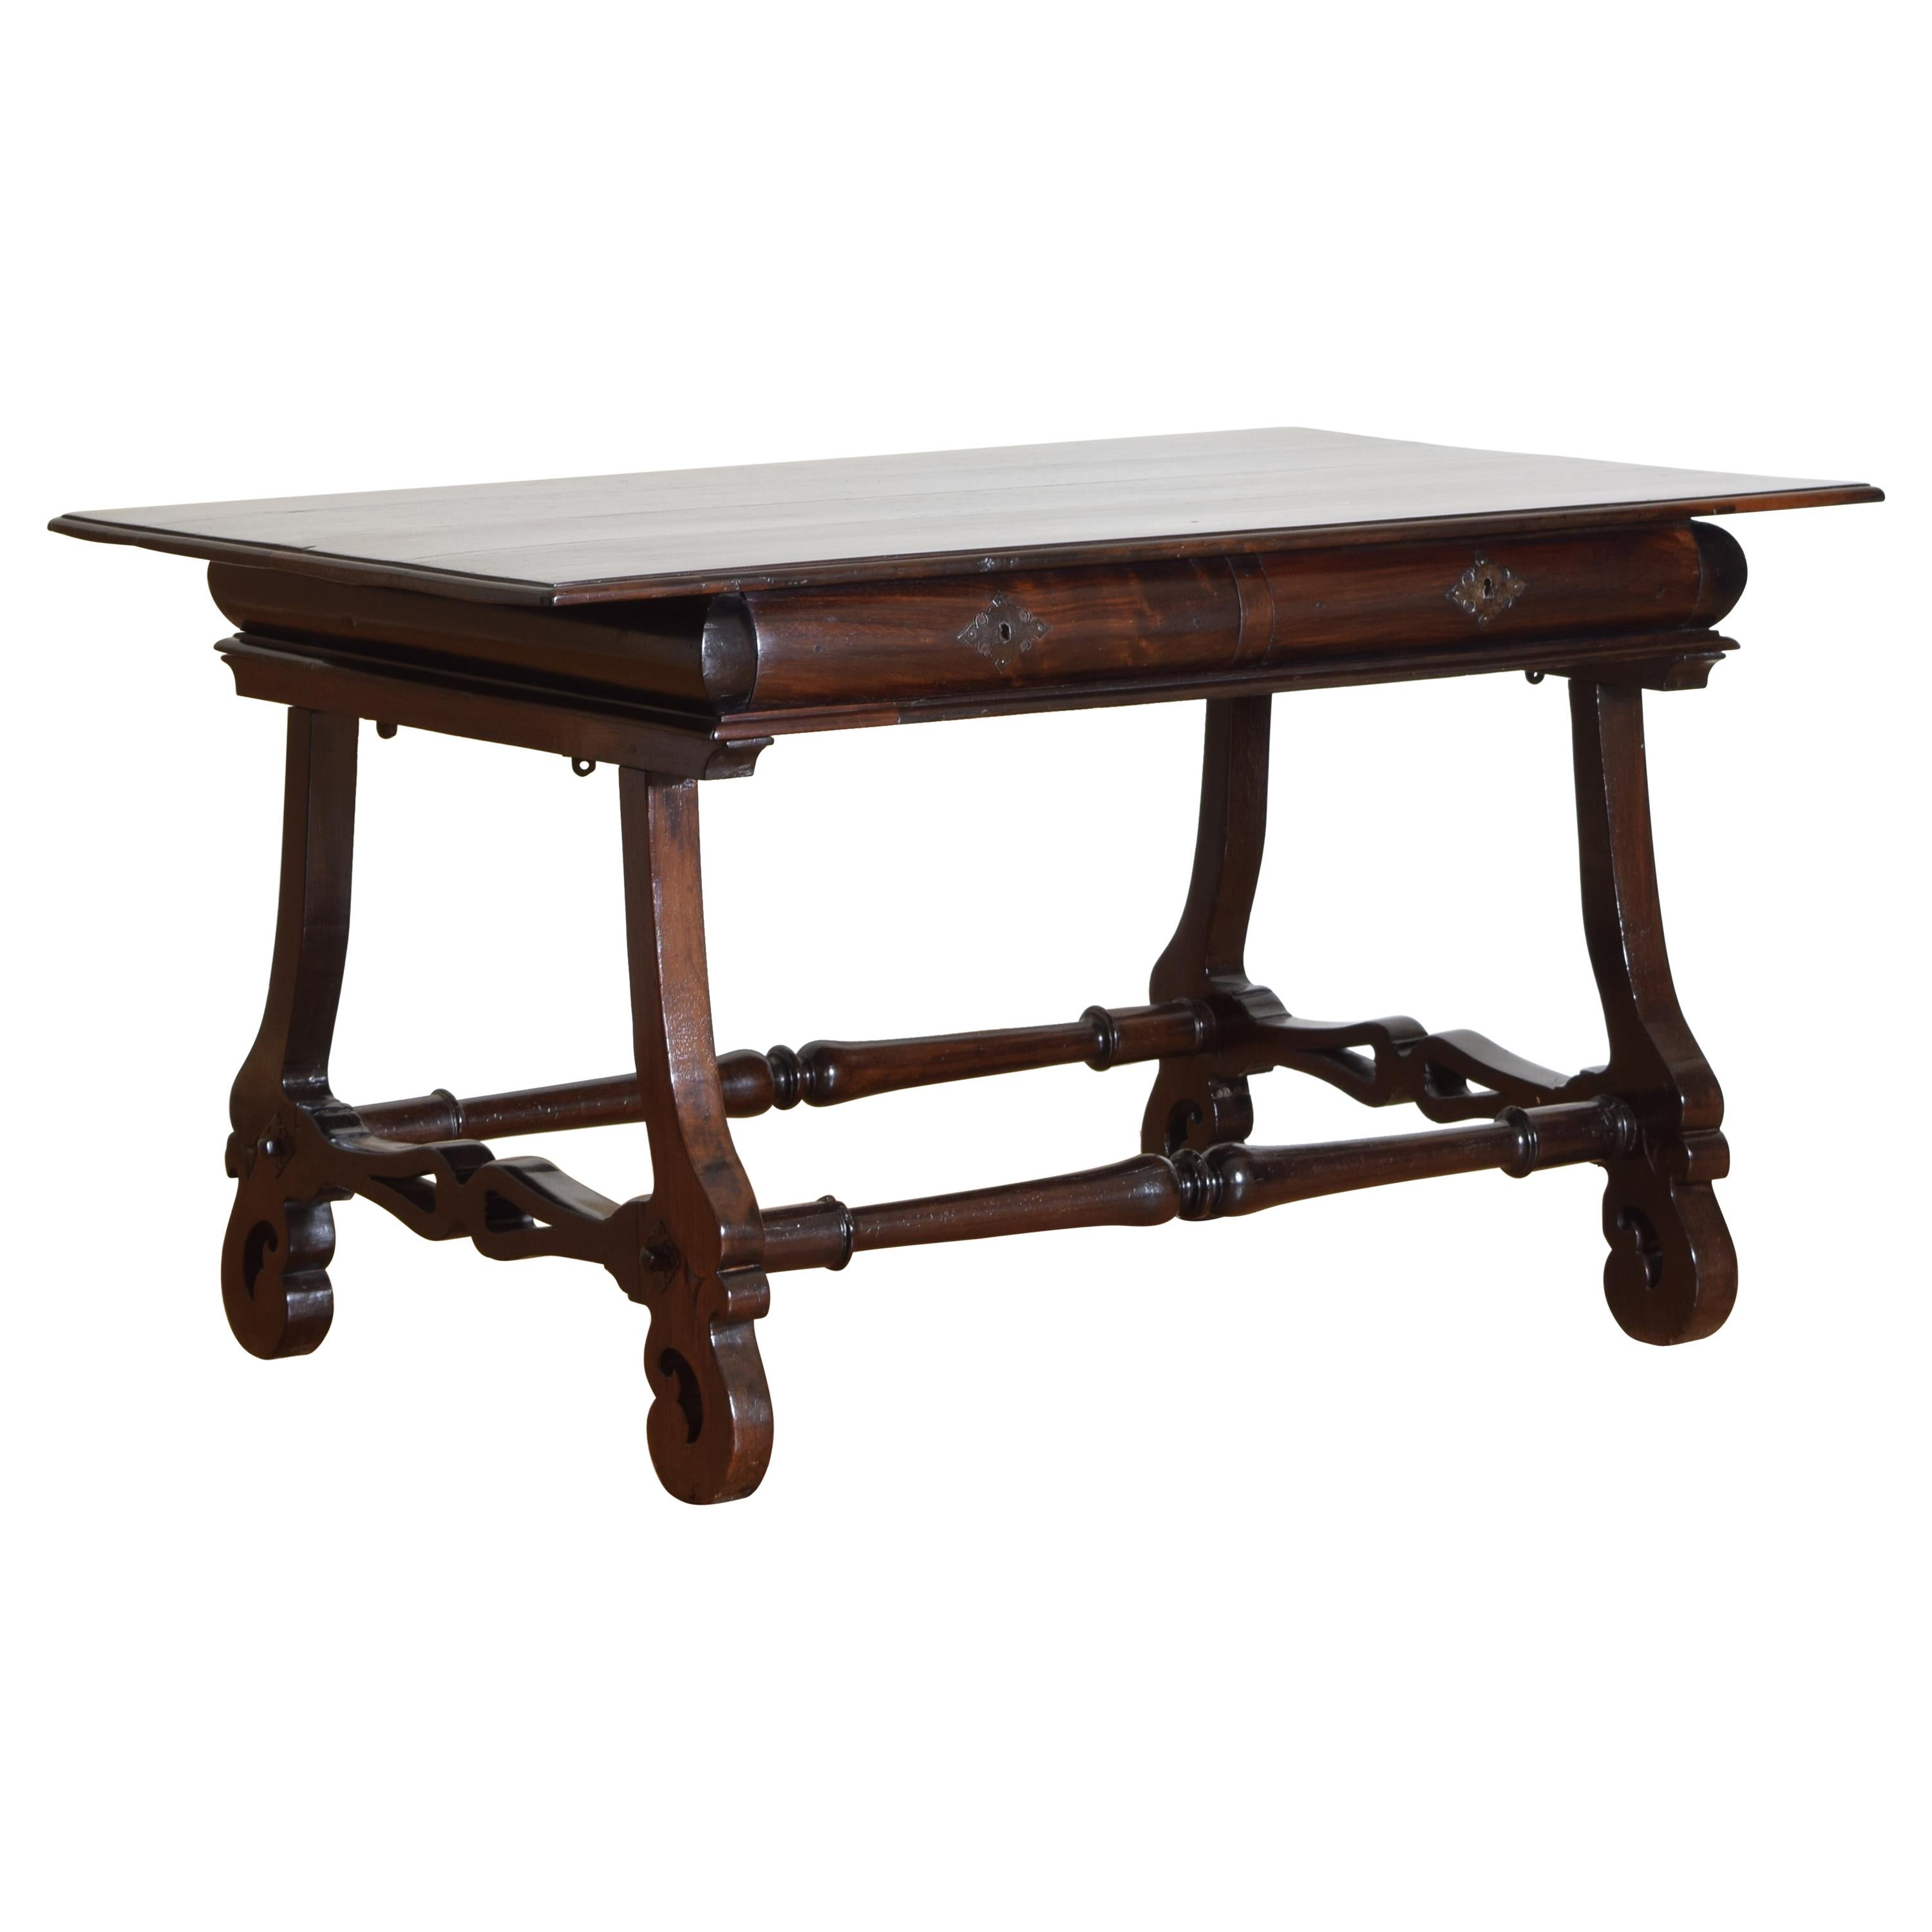 Portuguese Late Baroque Rosewood 2-Drawer Center Table or Desk, 18th Century